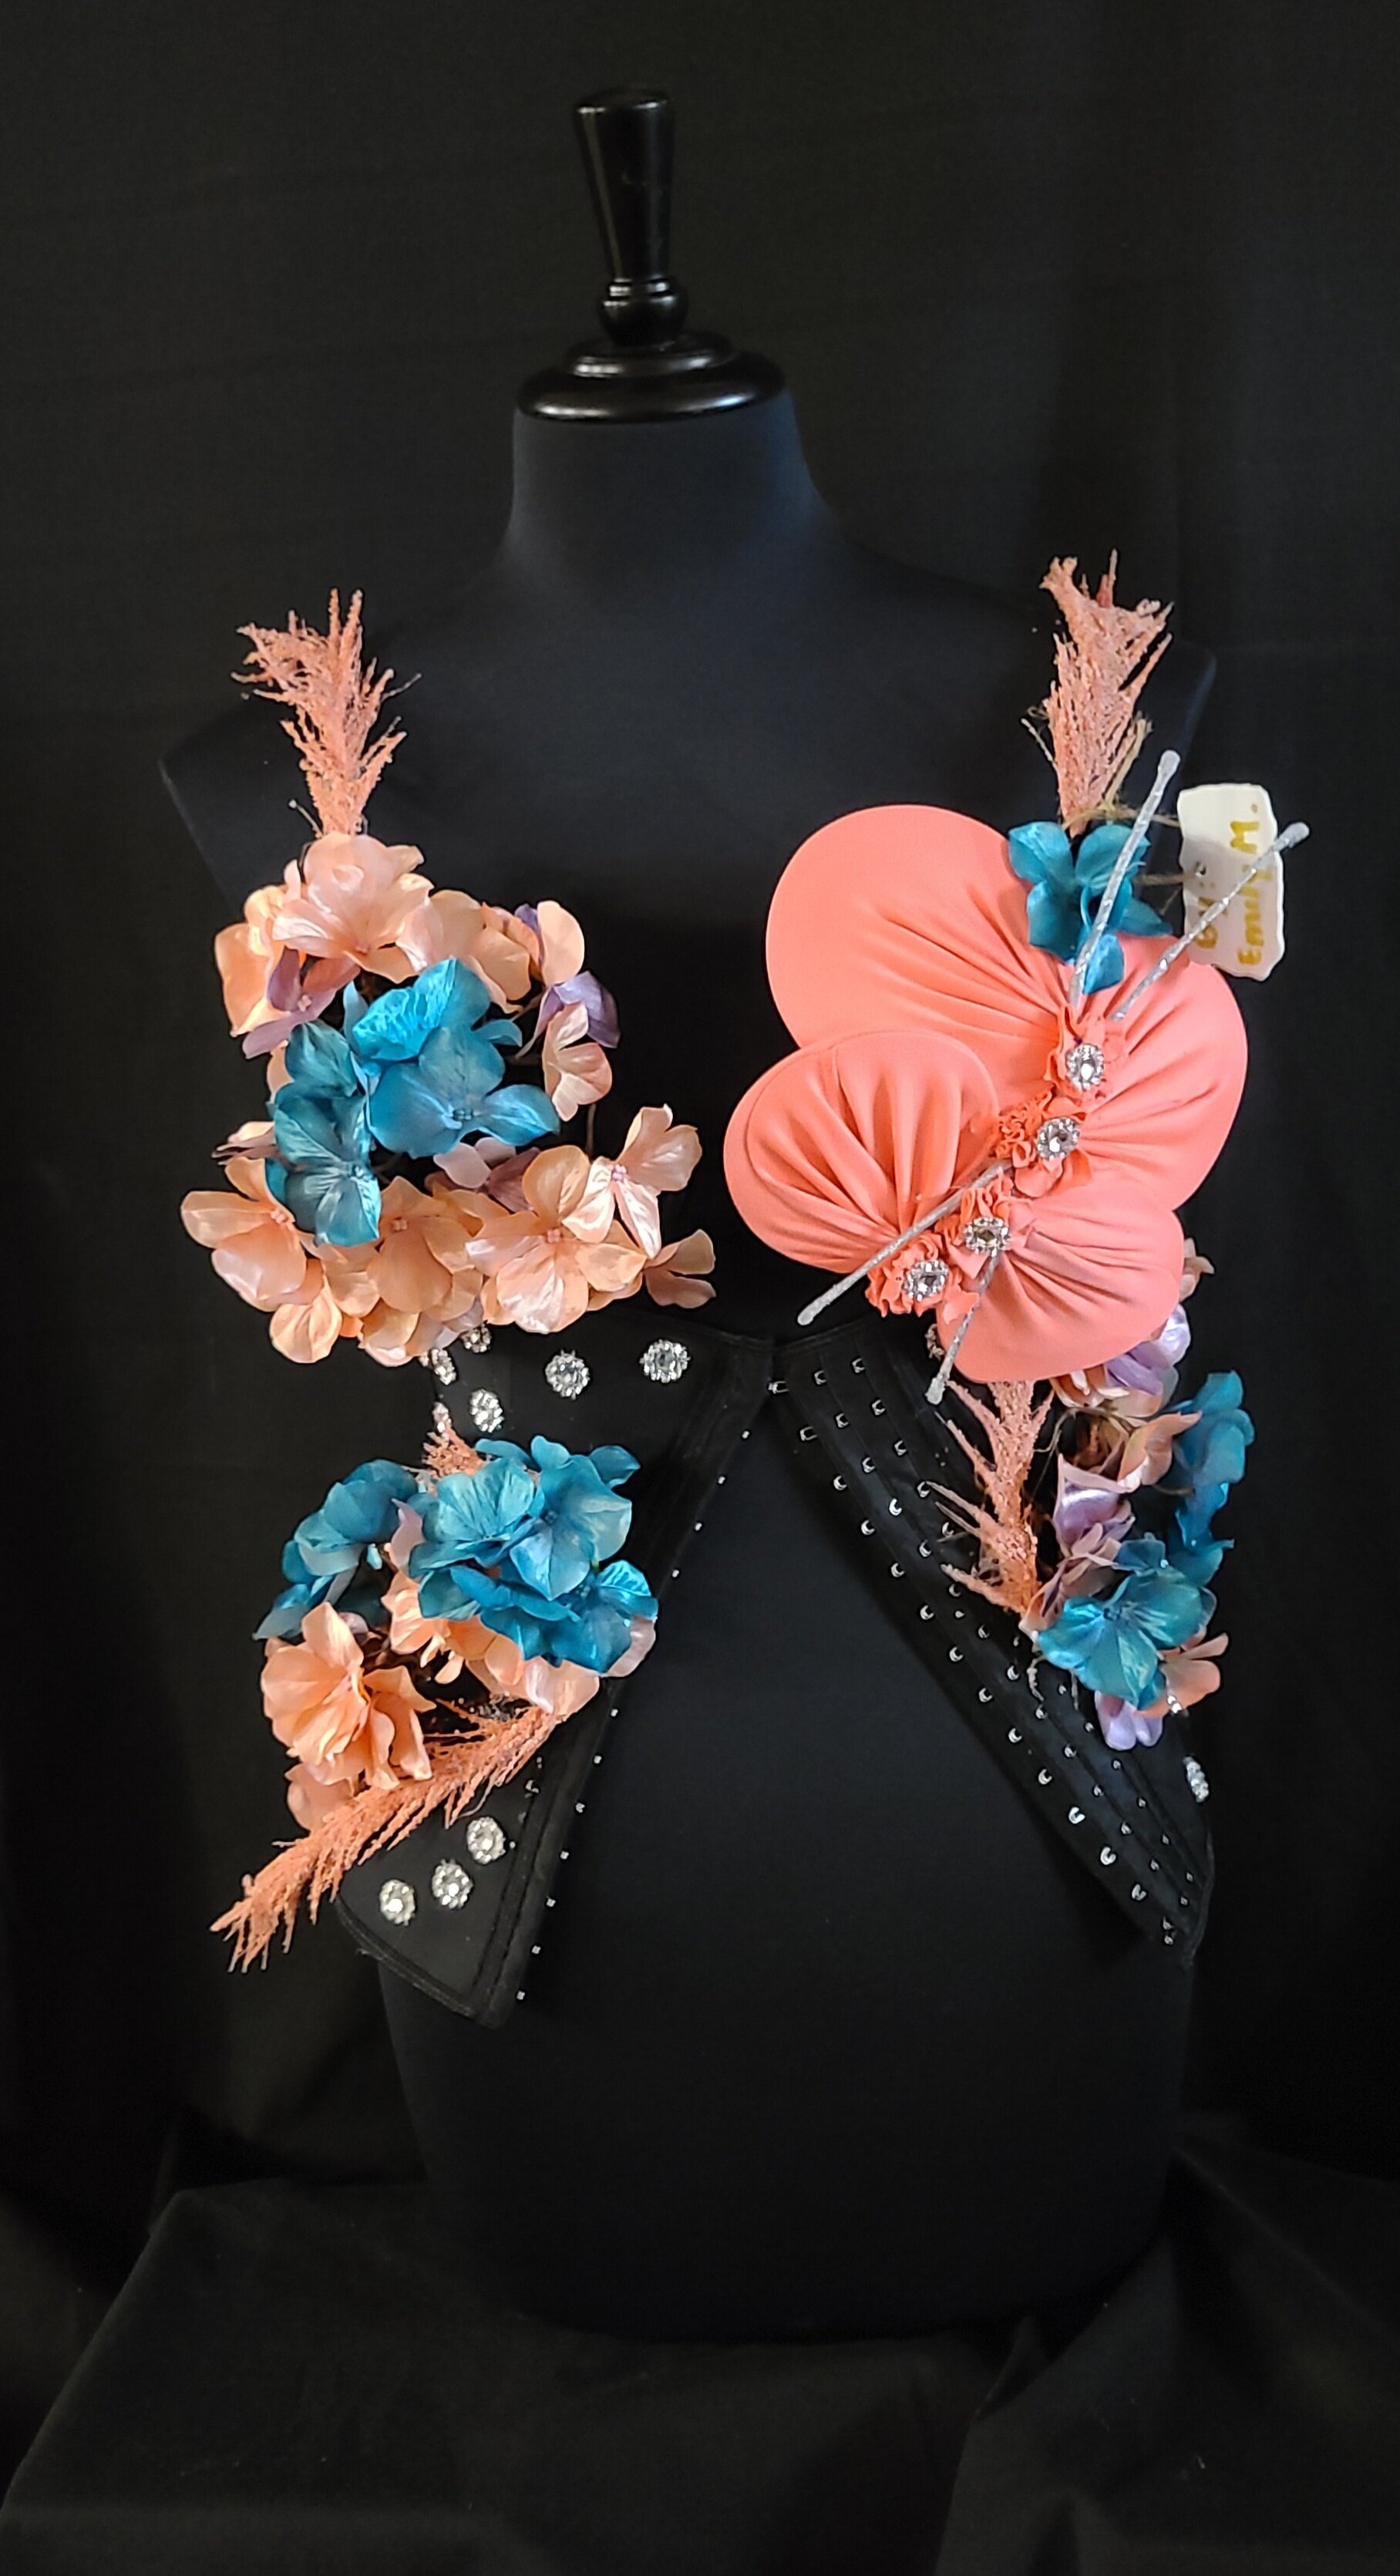 2021 Bra Art Gallery / People's Choice Award Voting — Bras for the